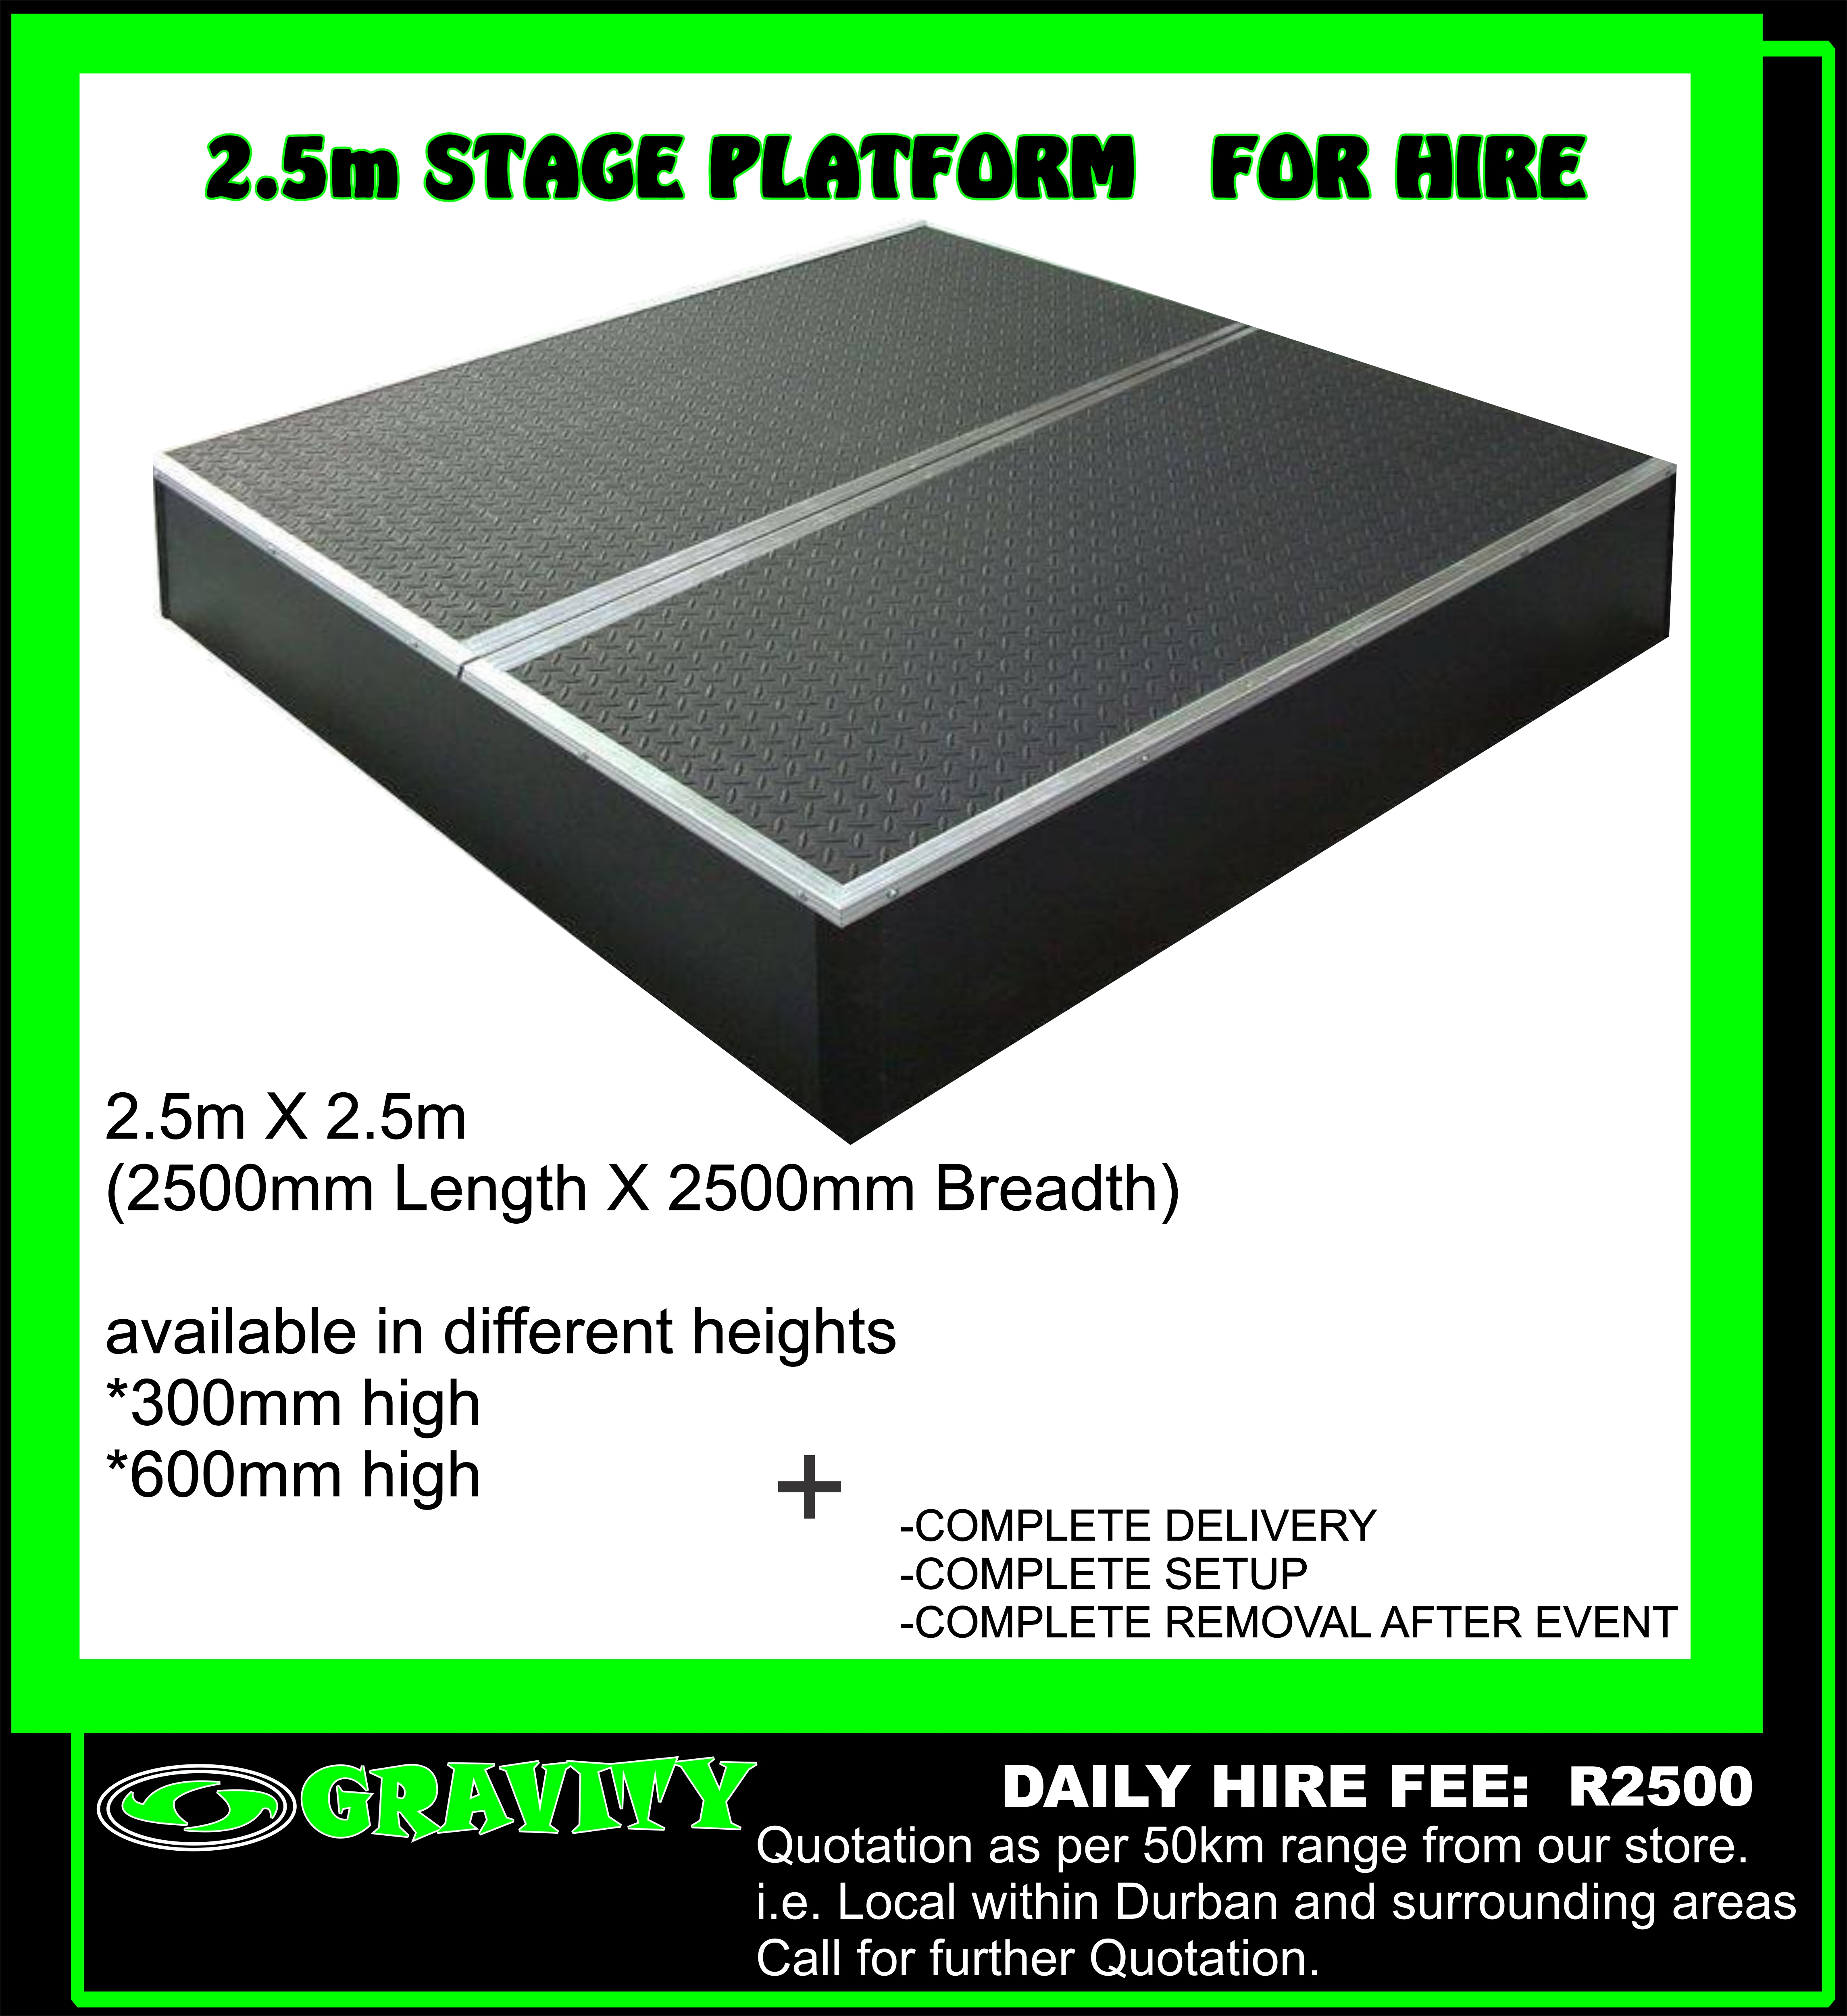 2.5M STAGE  PLATFORM HIRE STAGE HIRE AND INSTALLATIONS HIRE AND INSTALLATION OF STAGE PLATFORMS FOR HIRE AT GRAVITY SOUND AND LIGHTING WAREHOUSE DURBAN 0315072736 STAGE HIRE STAGE RENTALS FOR EVENTS AND CONCERTS AND STAGE MEETINGS STAGE PLATFORMS WITH SETUP AND DELIVERY  AT GRAVITY DJ STORE 0315072436 We provide consultation, coordination with other event providers, delivery & setup of stage rentals, and pick-up. If you need to rent a stage, stage riser, platform,We can provide the platform that is right for you, our staging and structures are compliant with all safety regulations. Our stage rental solution offers creative and Virtual Productions provides a number of stage hire and stage rental options to the ... We can also offer catwalk hire for fashion shows, or single platform hire ONLY AT GRAVITY SOUND AND LIGHTING WAREHOUSE DURBAN 0315072463   0315072736